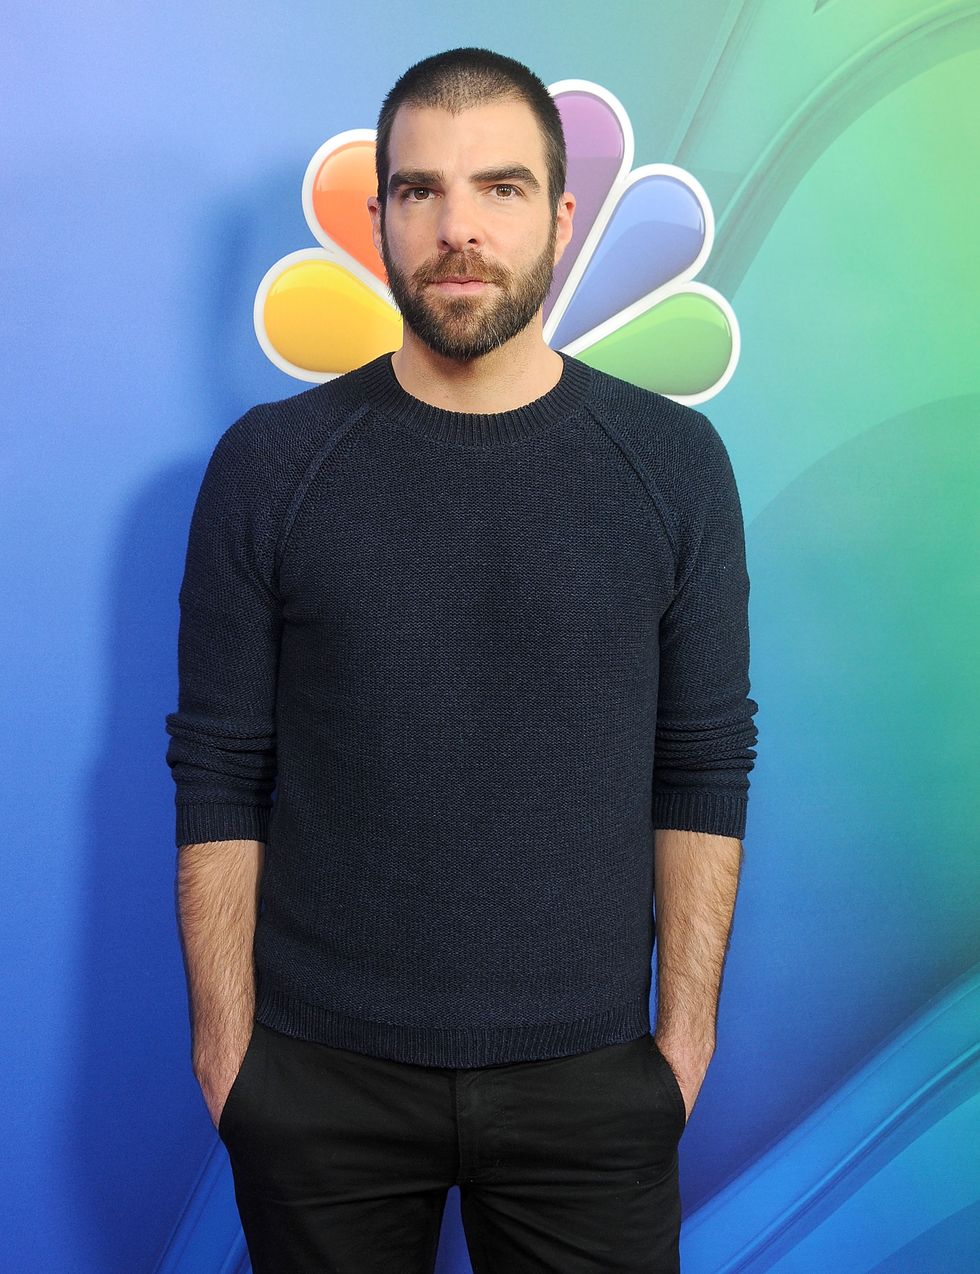 Star Trek's Zachary Quinto explains decision to come out as gay